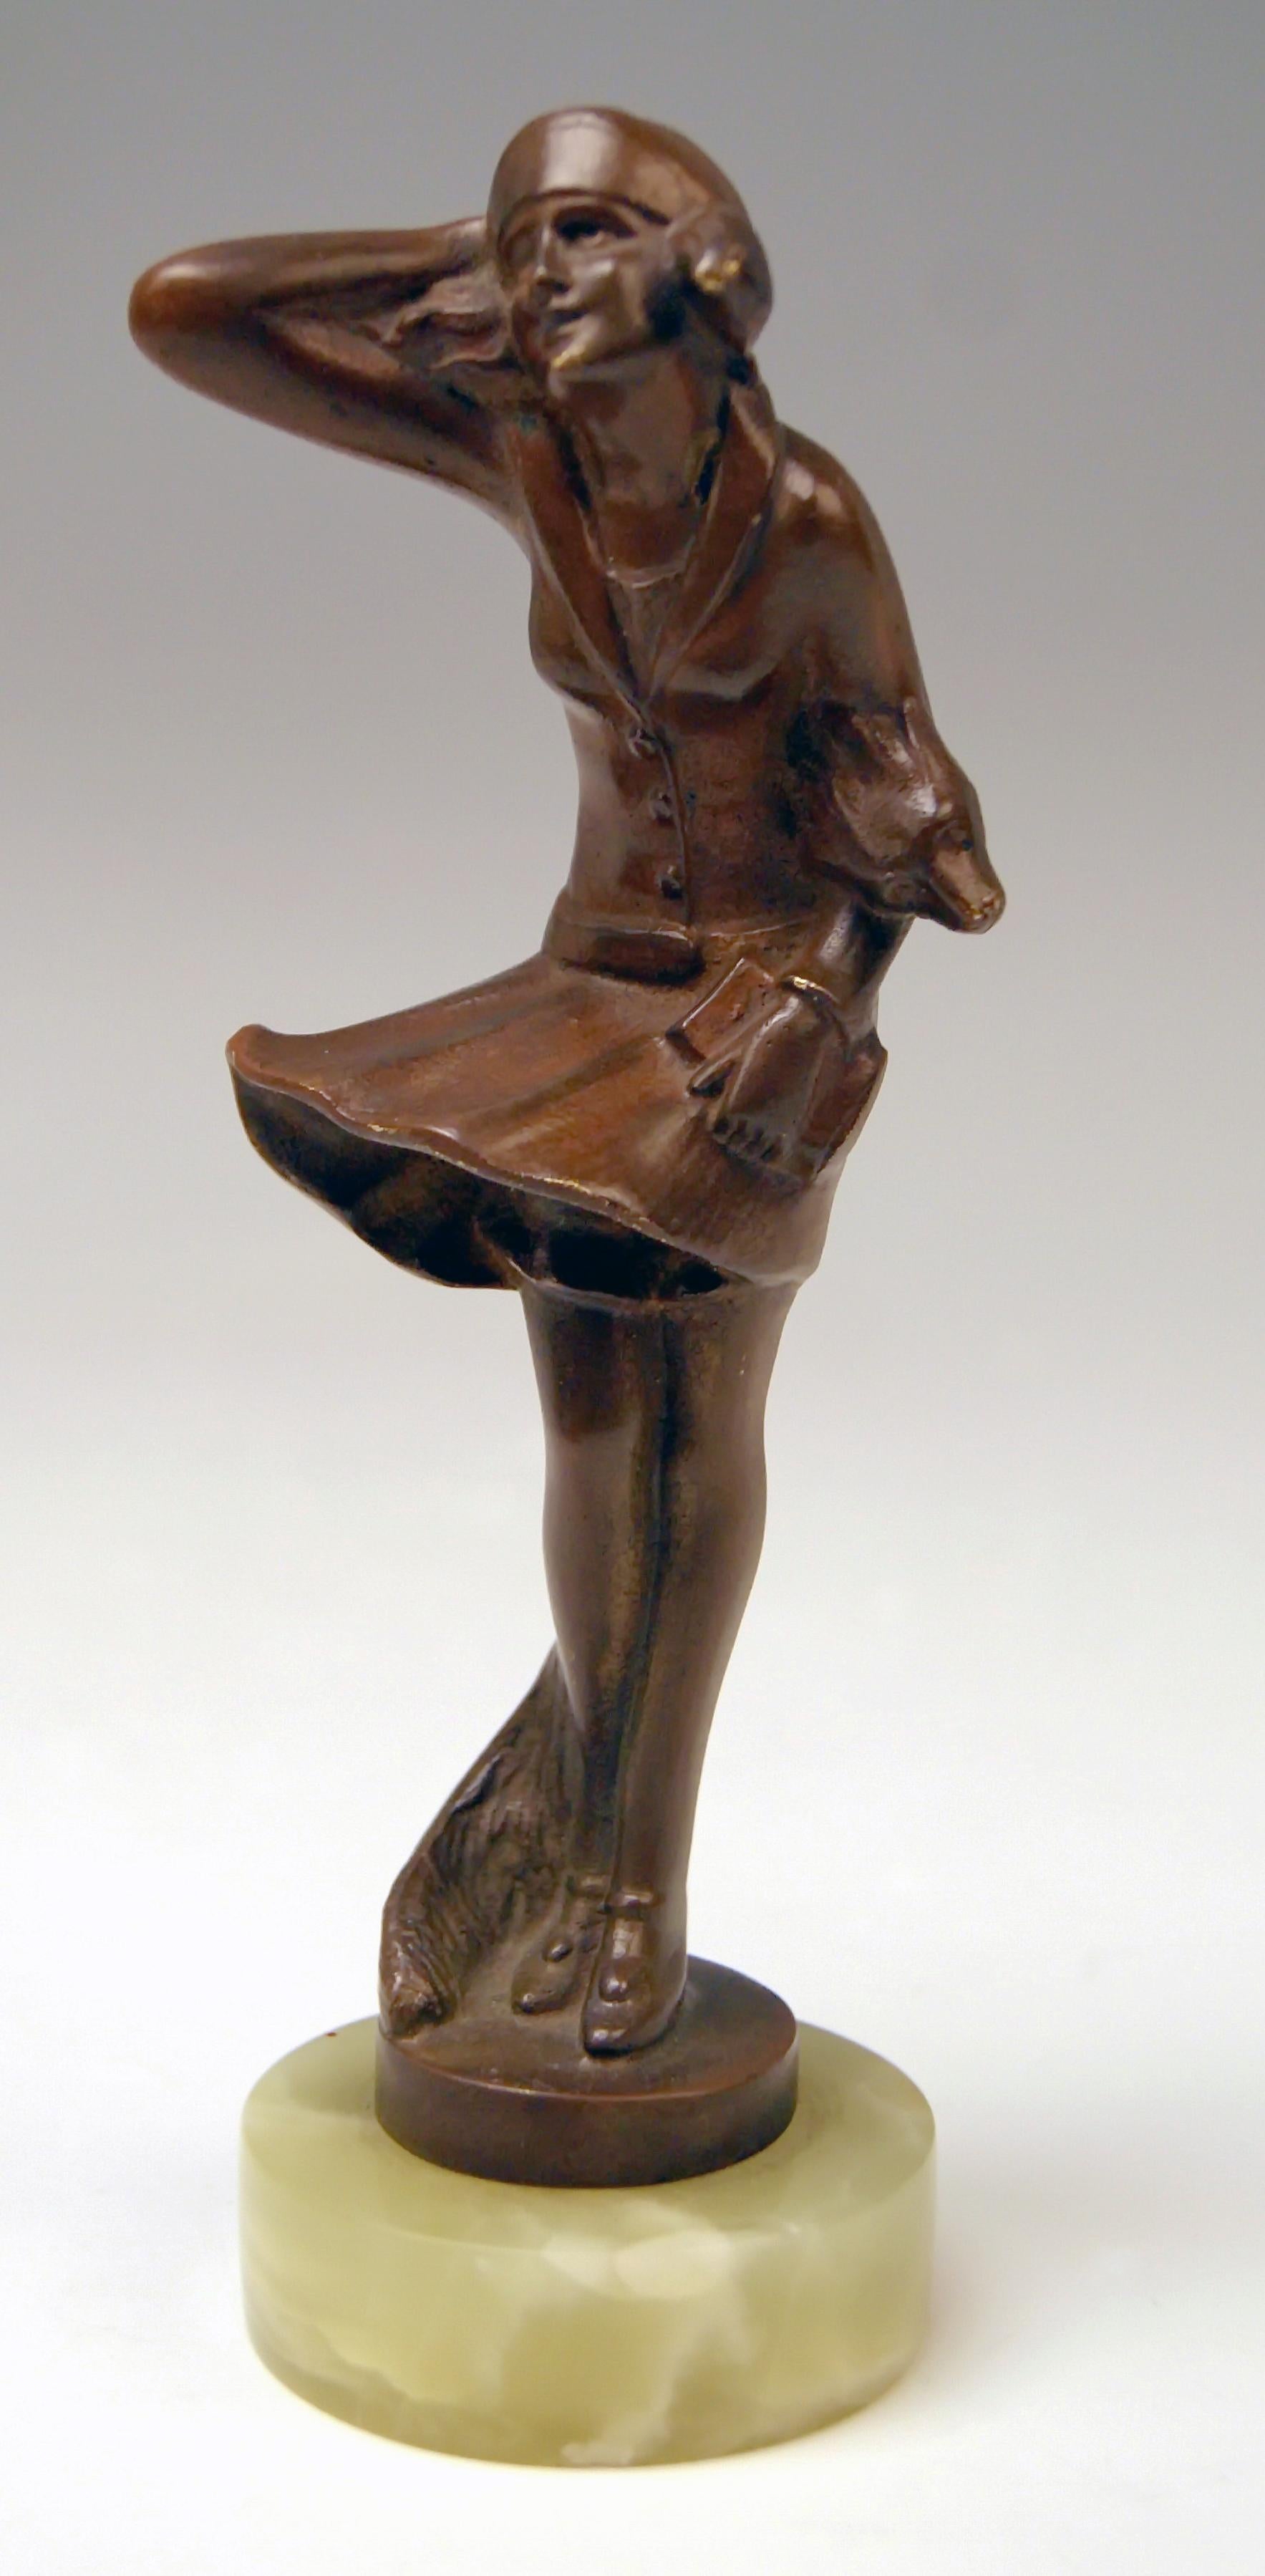 Vienna bronze finest Art Deco young lady with fox fur

Material & technique:
bronze / bronze casting / mold
with brown patina

Designed by Josef Lorenzl (1892-1950) / one of most important designers having been active for Goldscheider